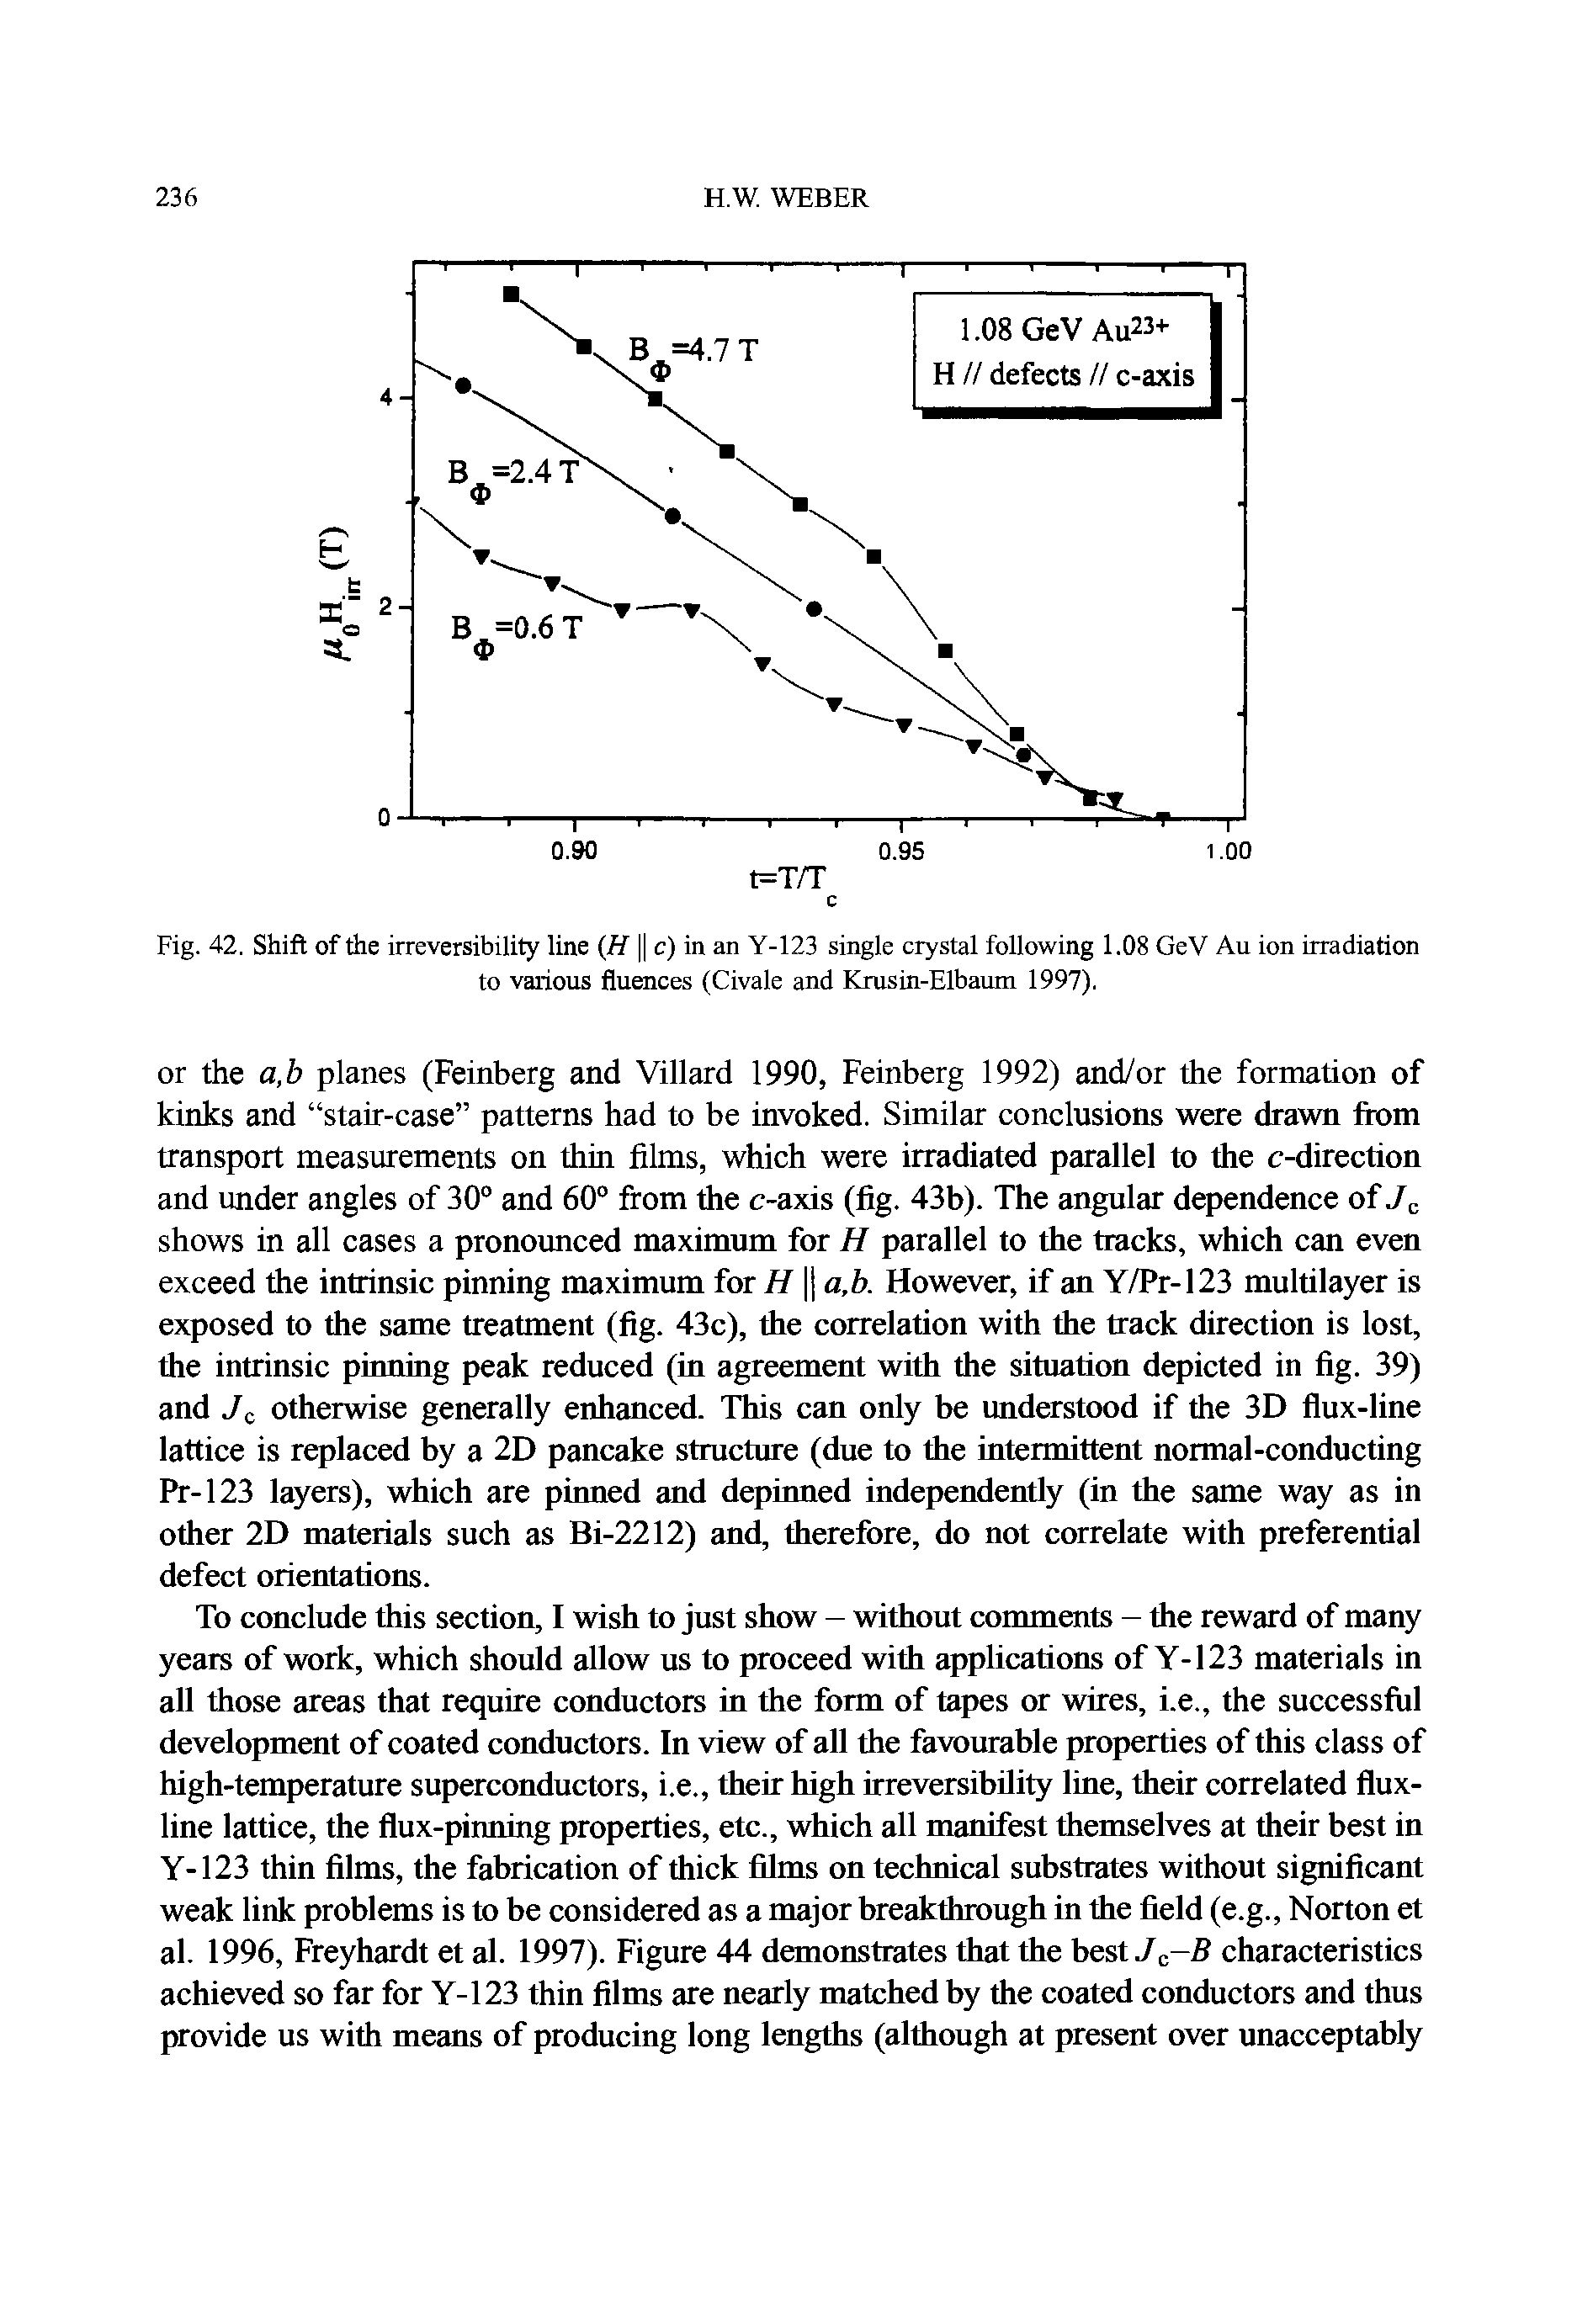 Fig. 42. Shift of the irreversibility line H c) in an Y-123 single crystal following 1.08 GeV Au ion irradiation to various fluences (Civale and Krusin-Elbaum 1997).